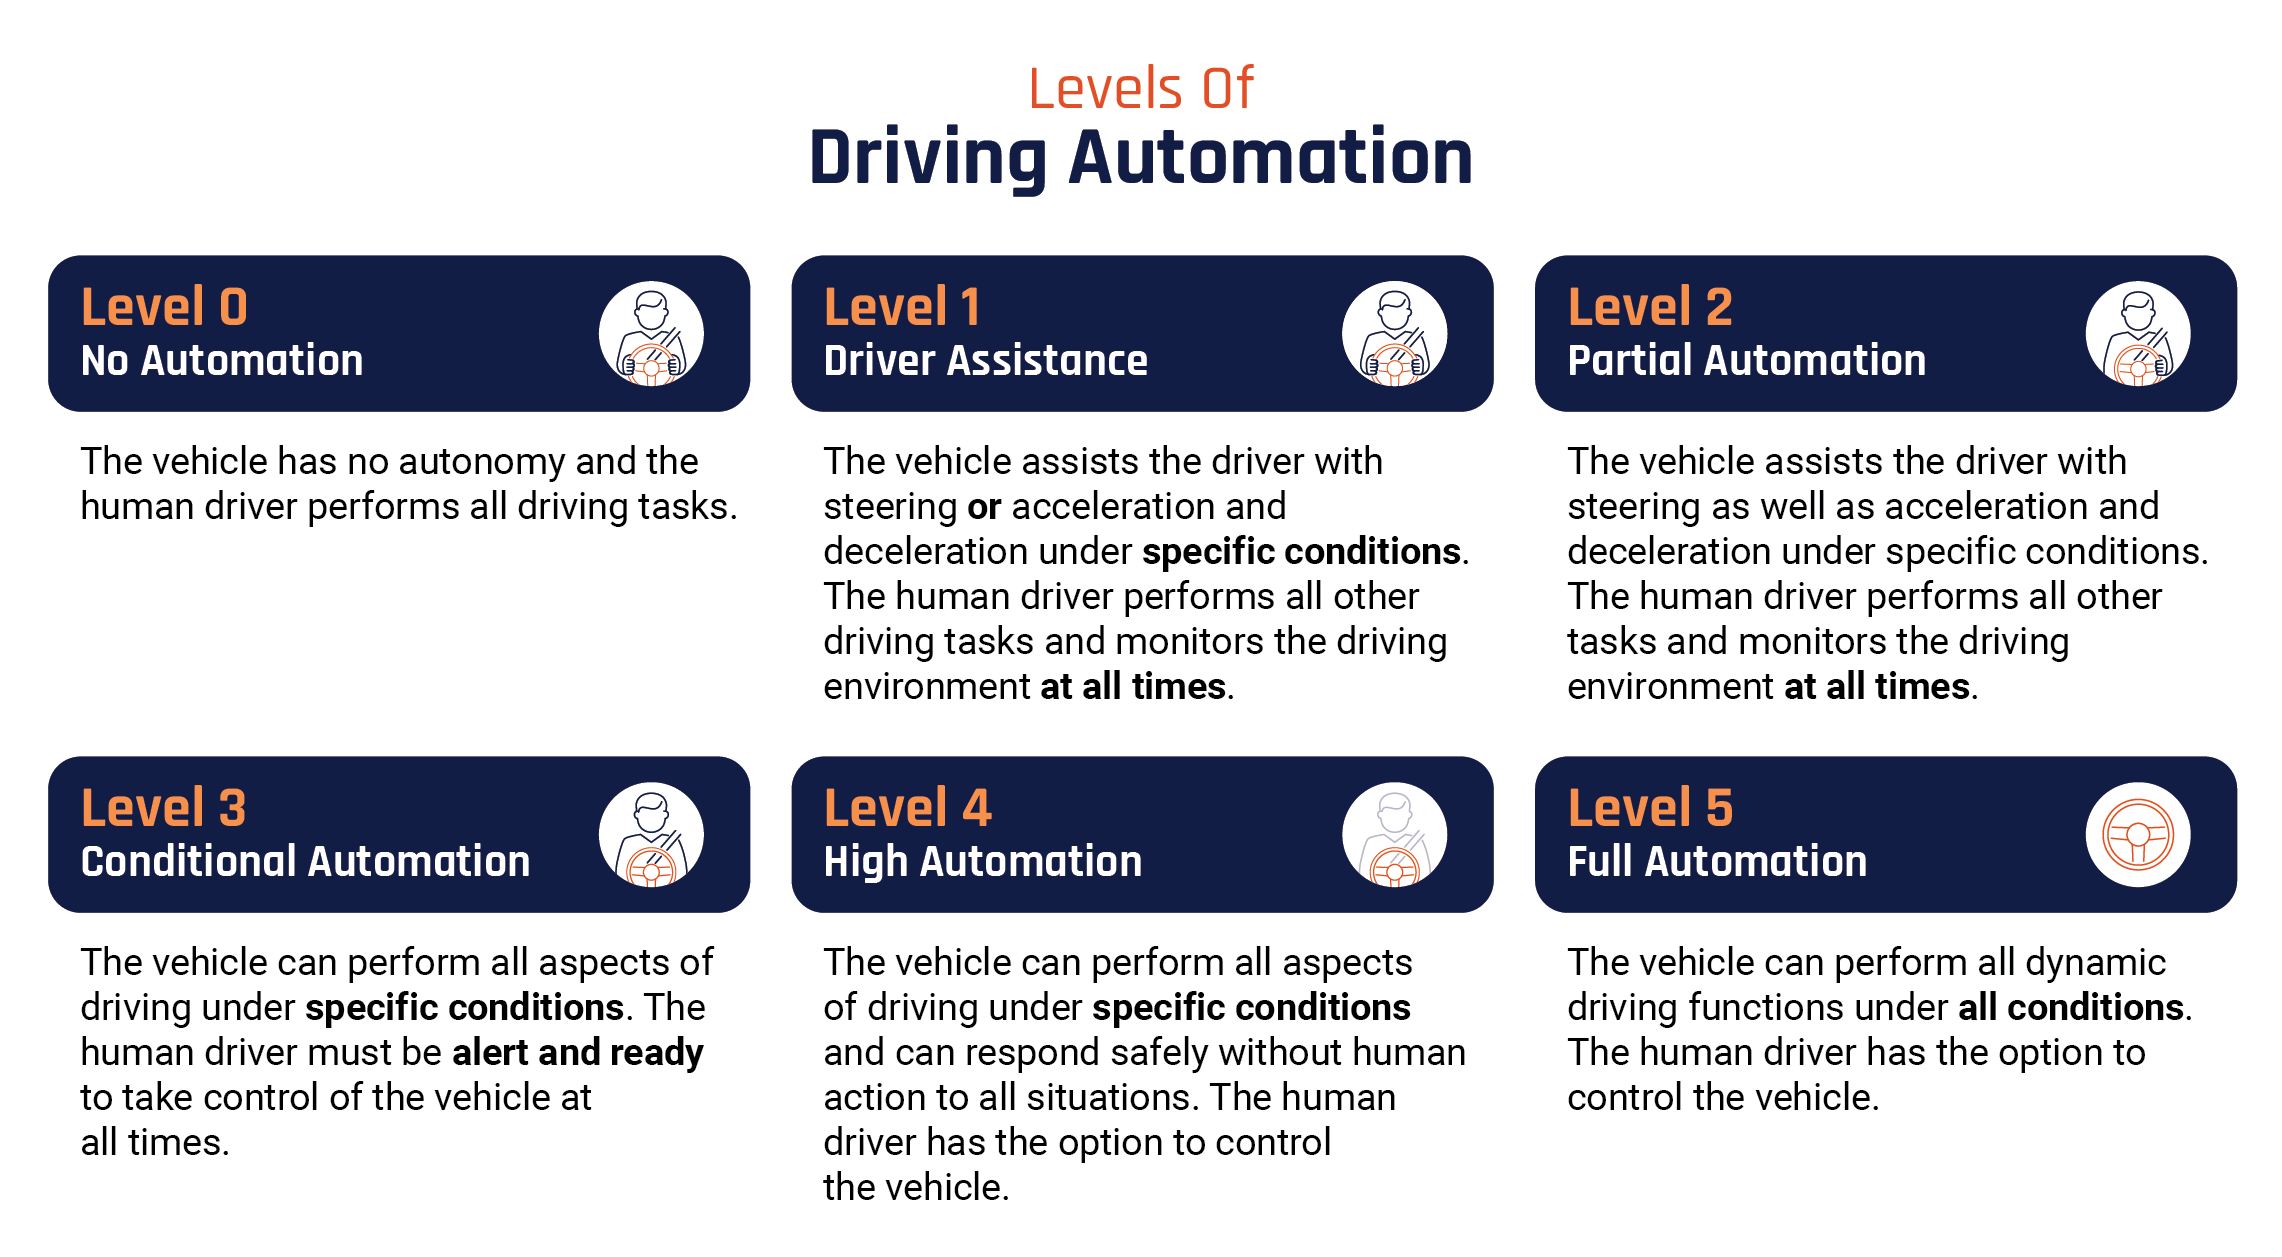 Levels of driving automation - long description immediately follows